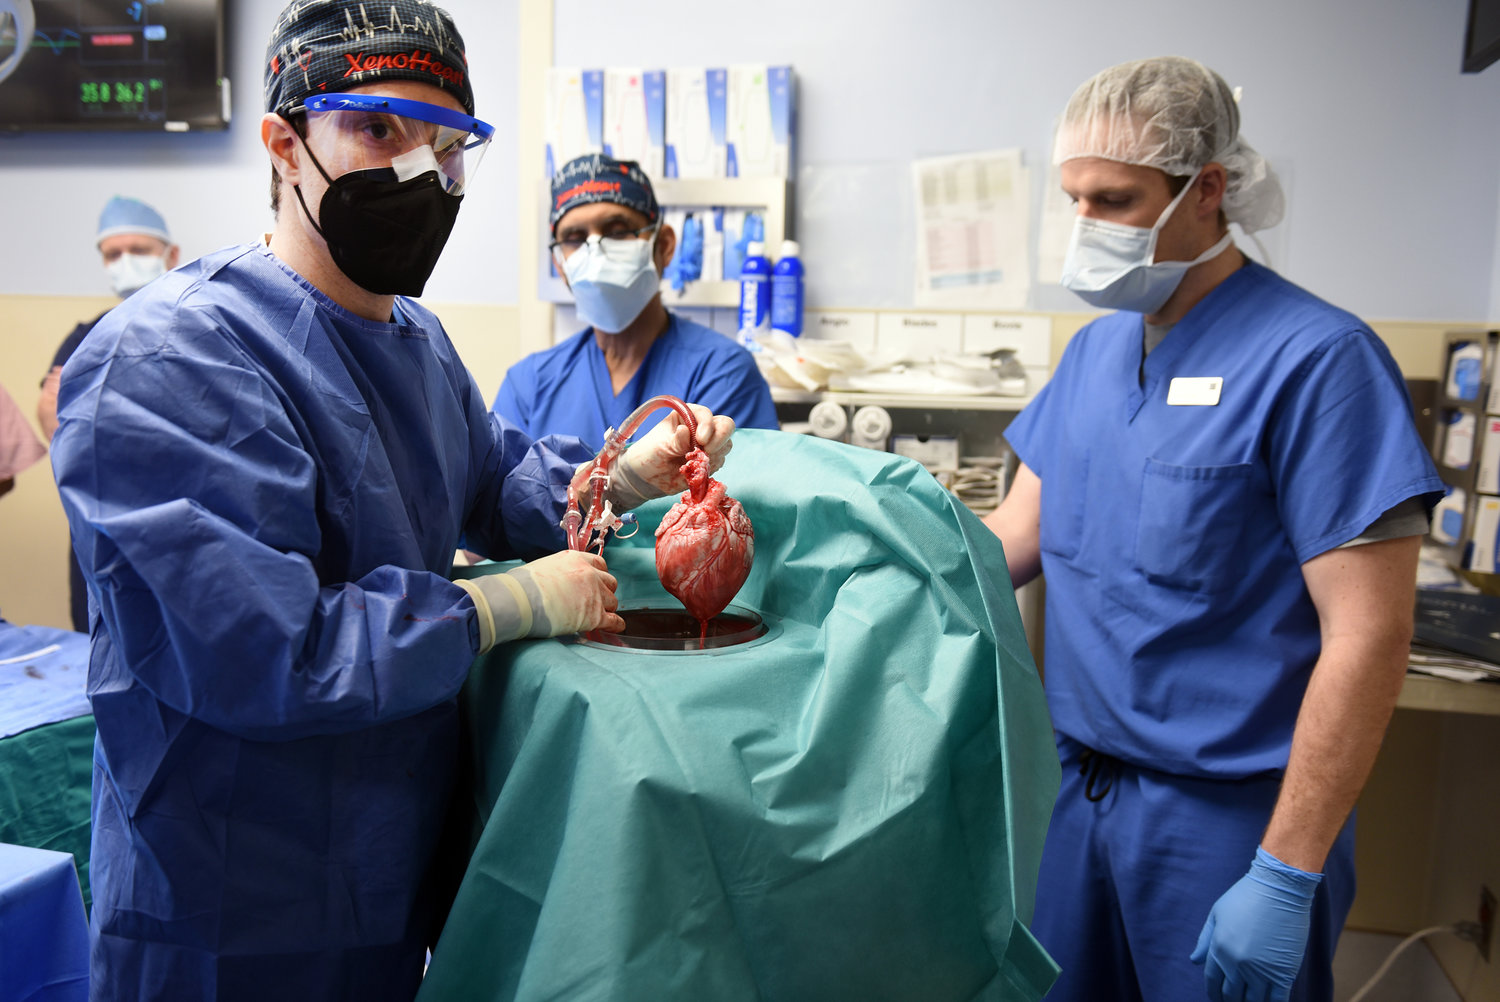 Doctors hold a pig heart that was transplanted into a Maryland man. Surgeons and clinicians from the University of Maryland School of Medicine and the University of Maryland Medical Center performed the first successful transplant of a genetically modified pig’s heart to save his life, officials from the health system said. (Courtesy University of Maryland School of Medicine/TNS)